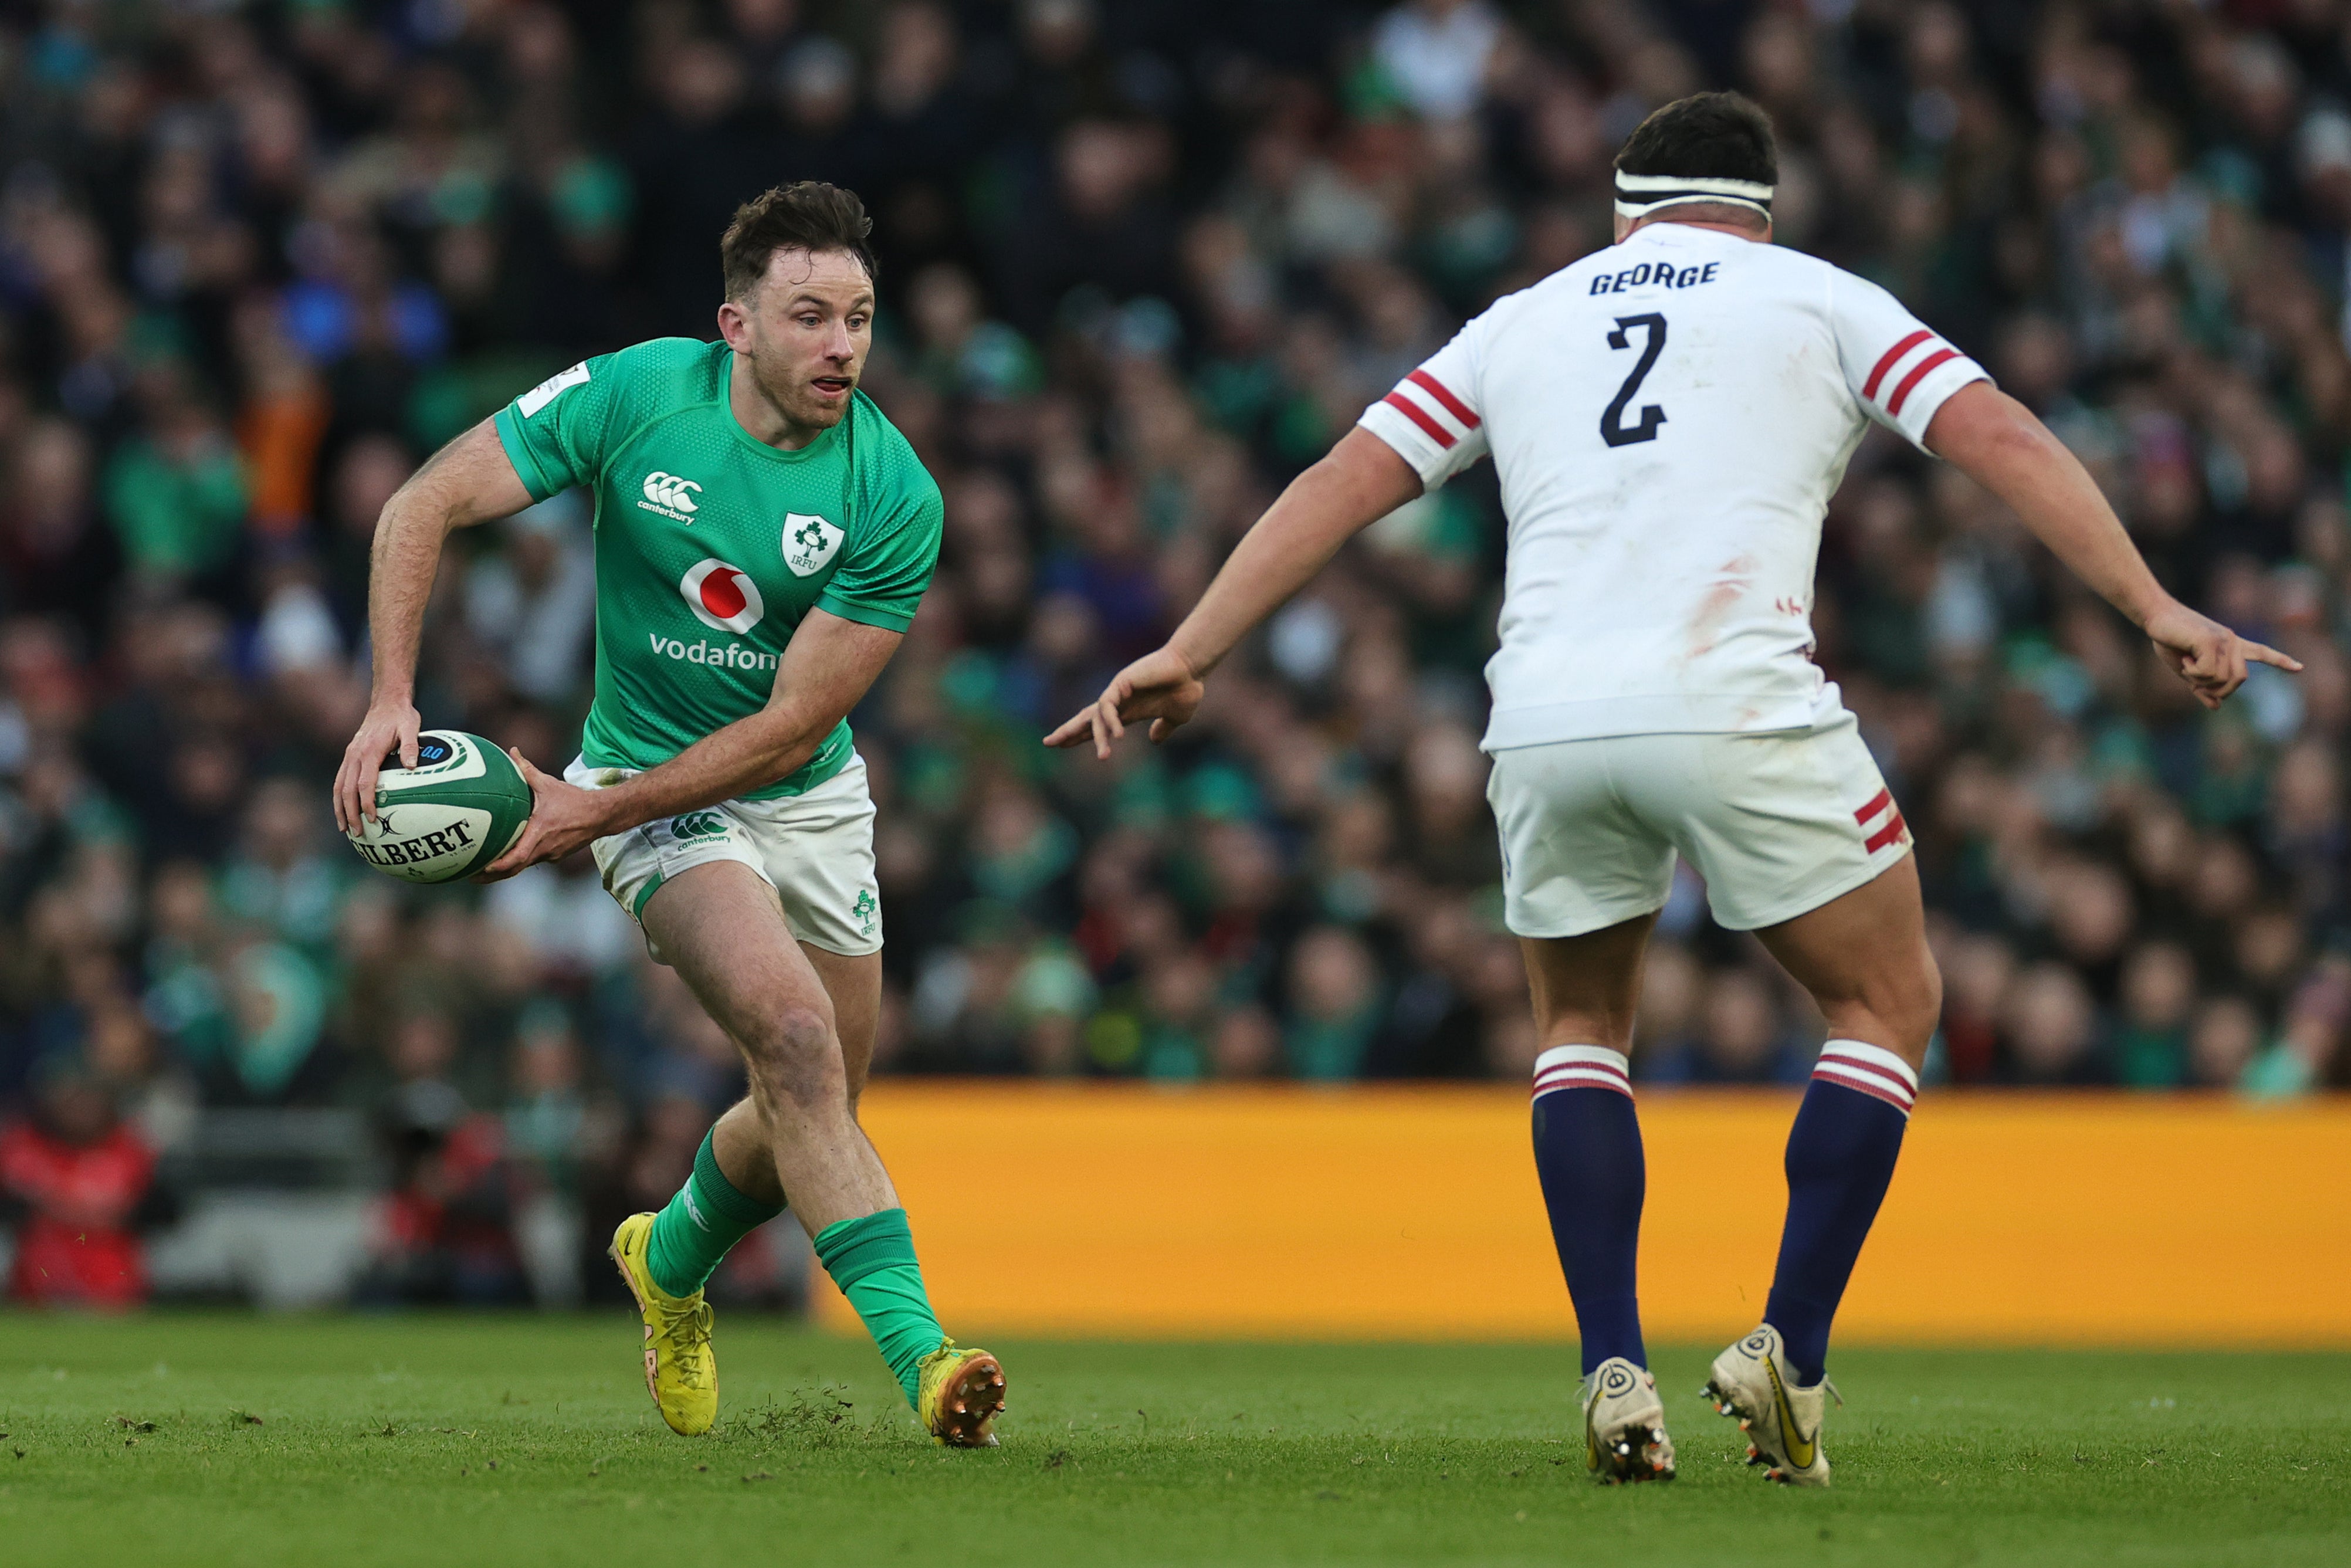 Hugo Keenan is fit to return to the Ireland side